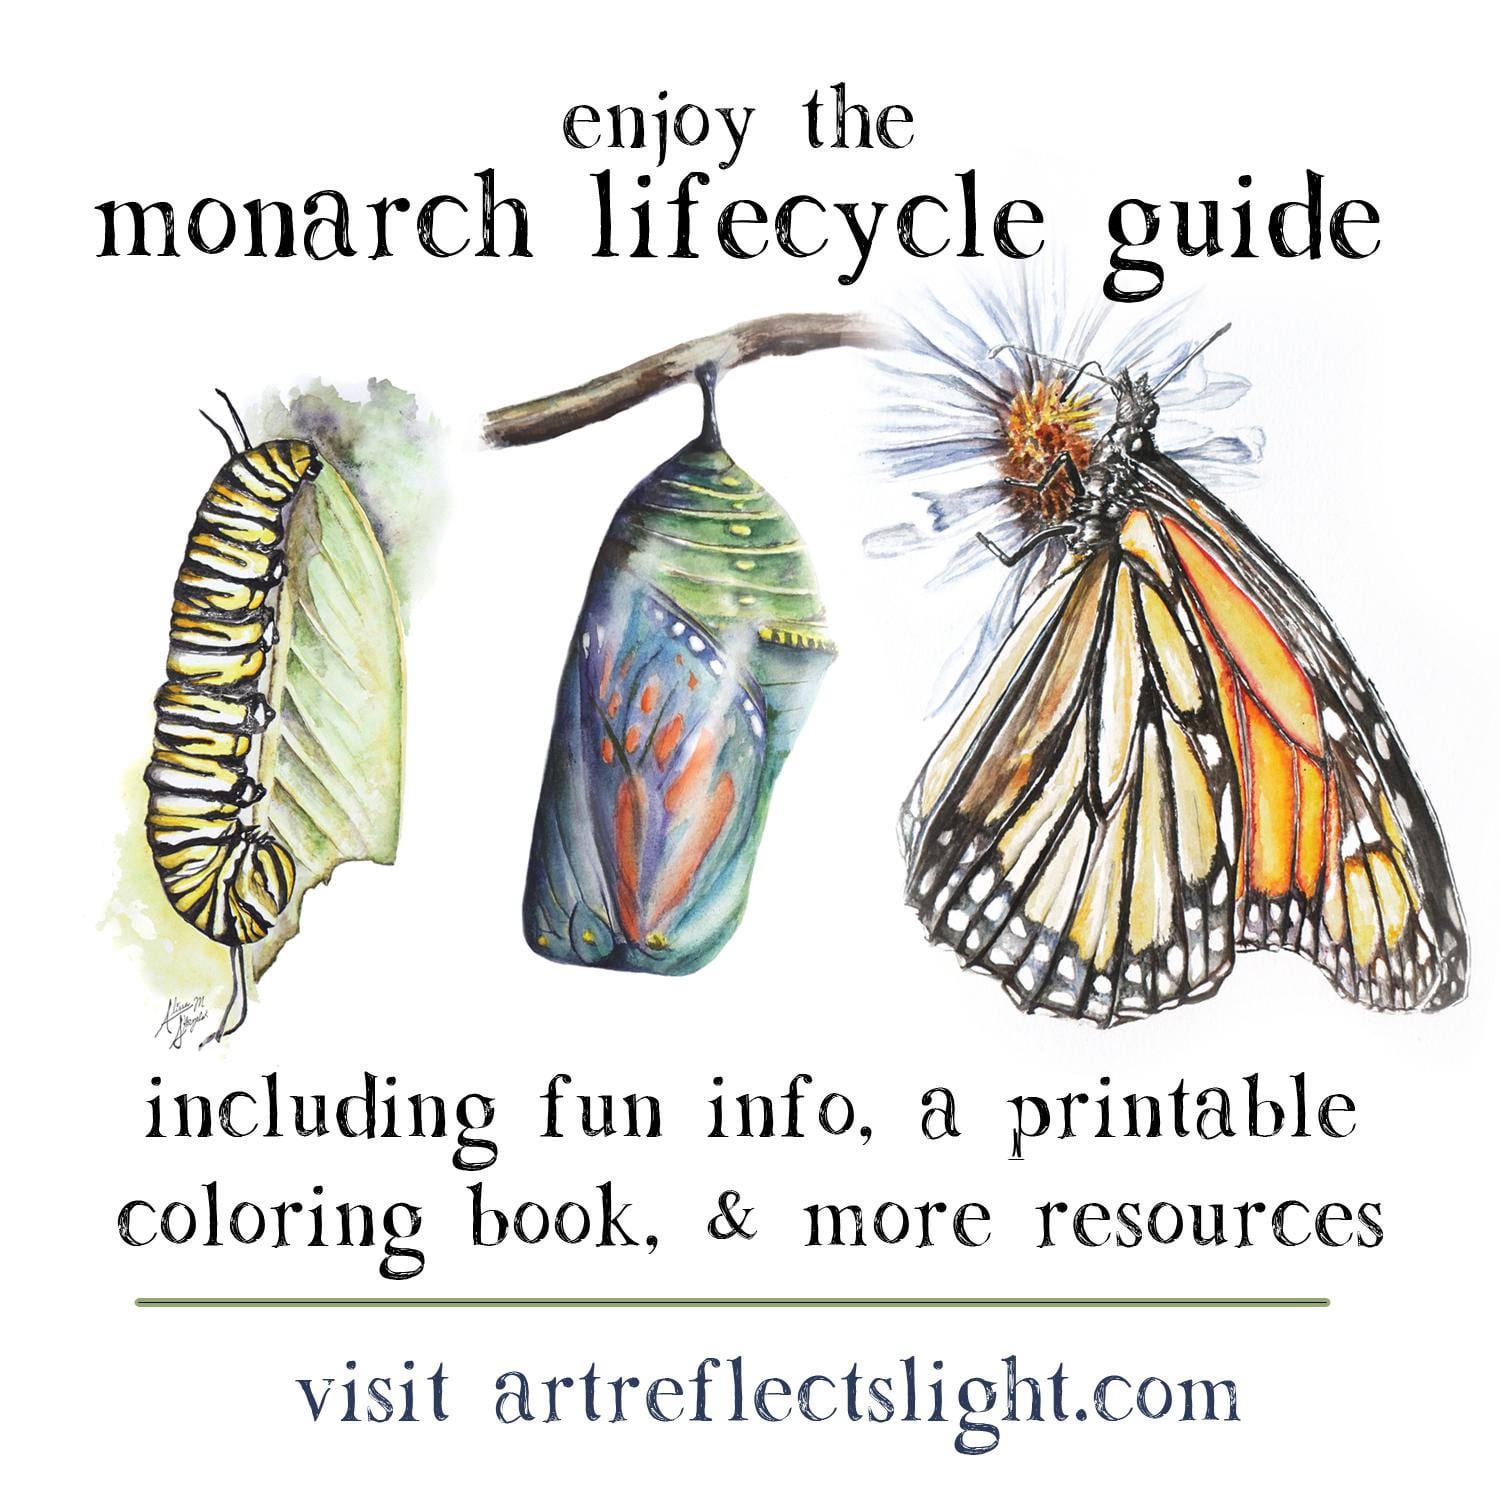 Free monarch butterfly guide and printable coloring book rgardening